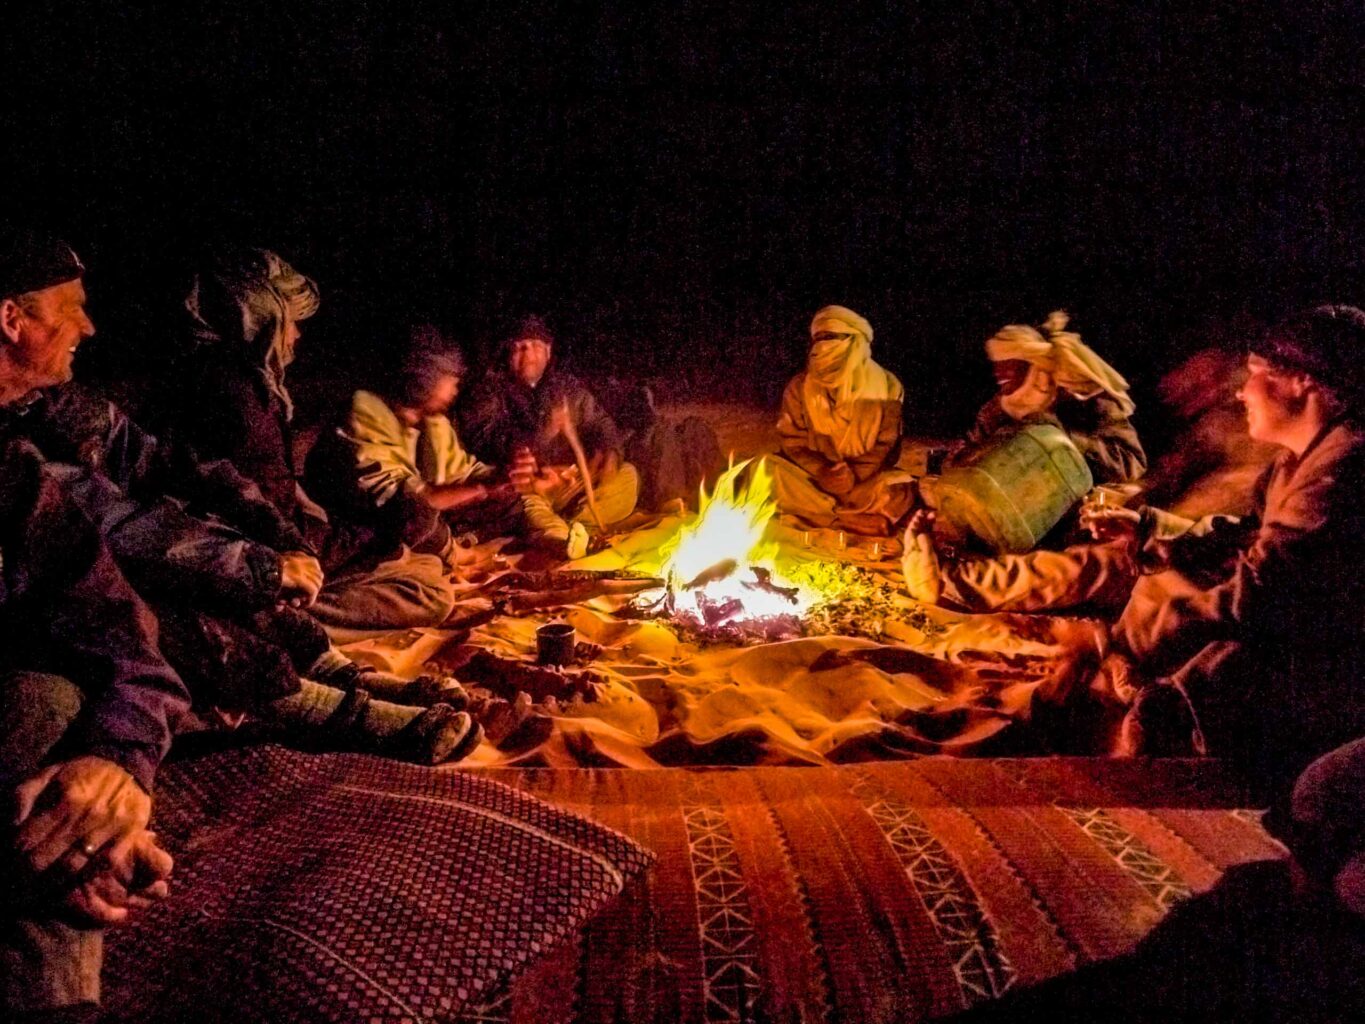 Nighttime in the Moroccan desert with a group of robed and turbaned nomads gathered around a roaring campfire.